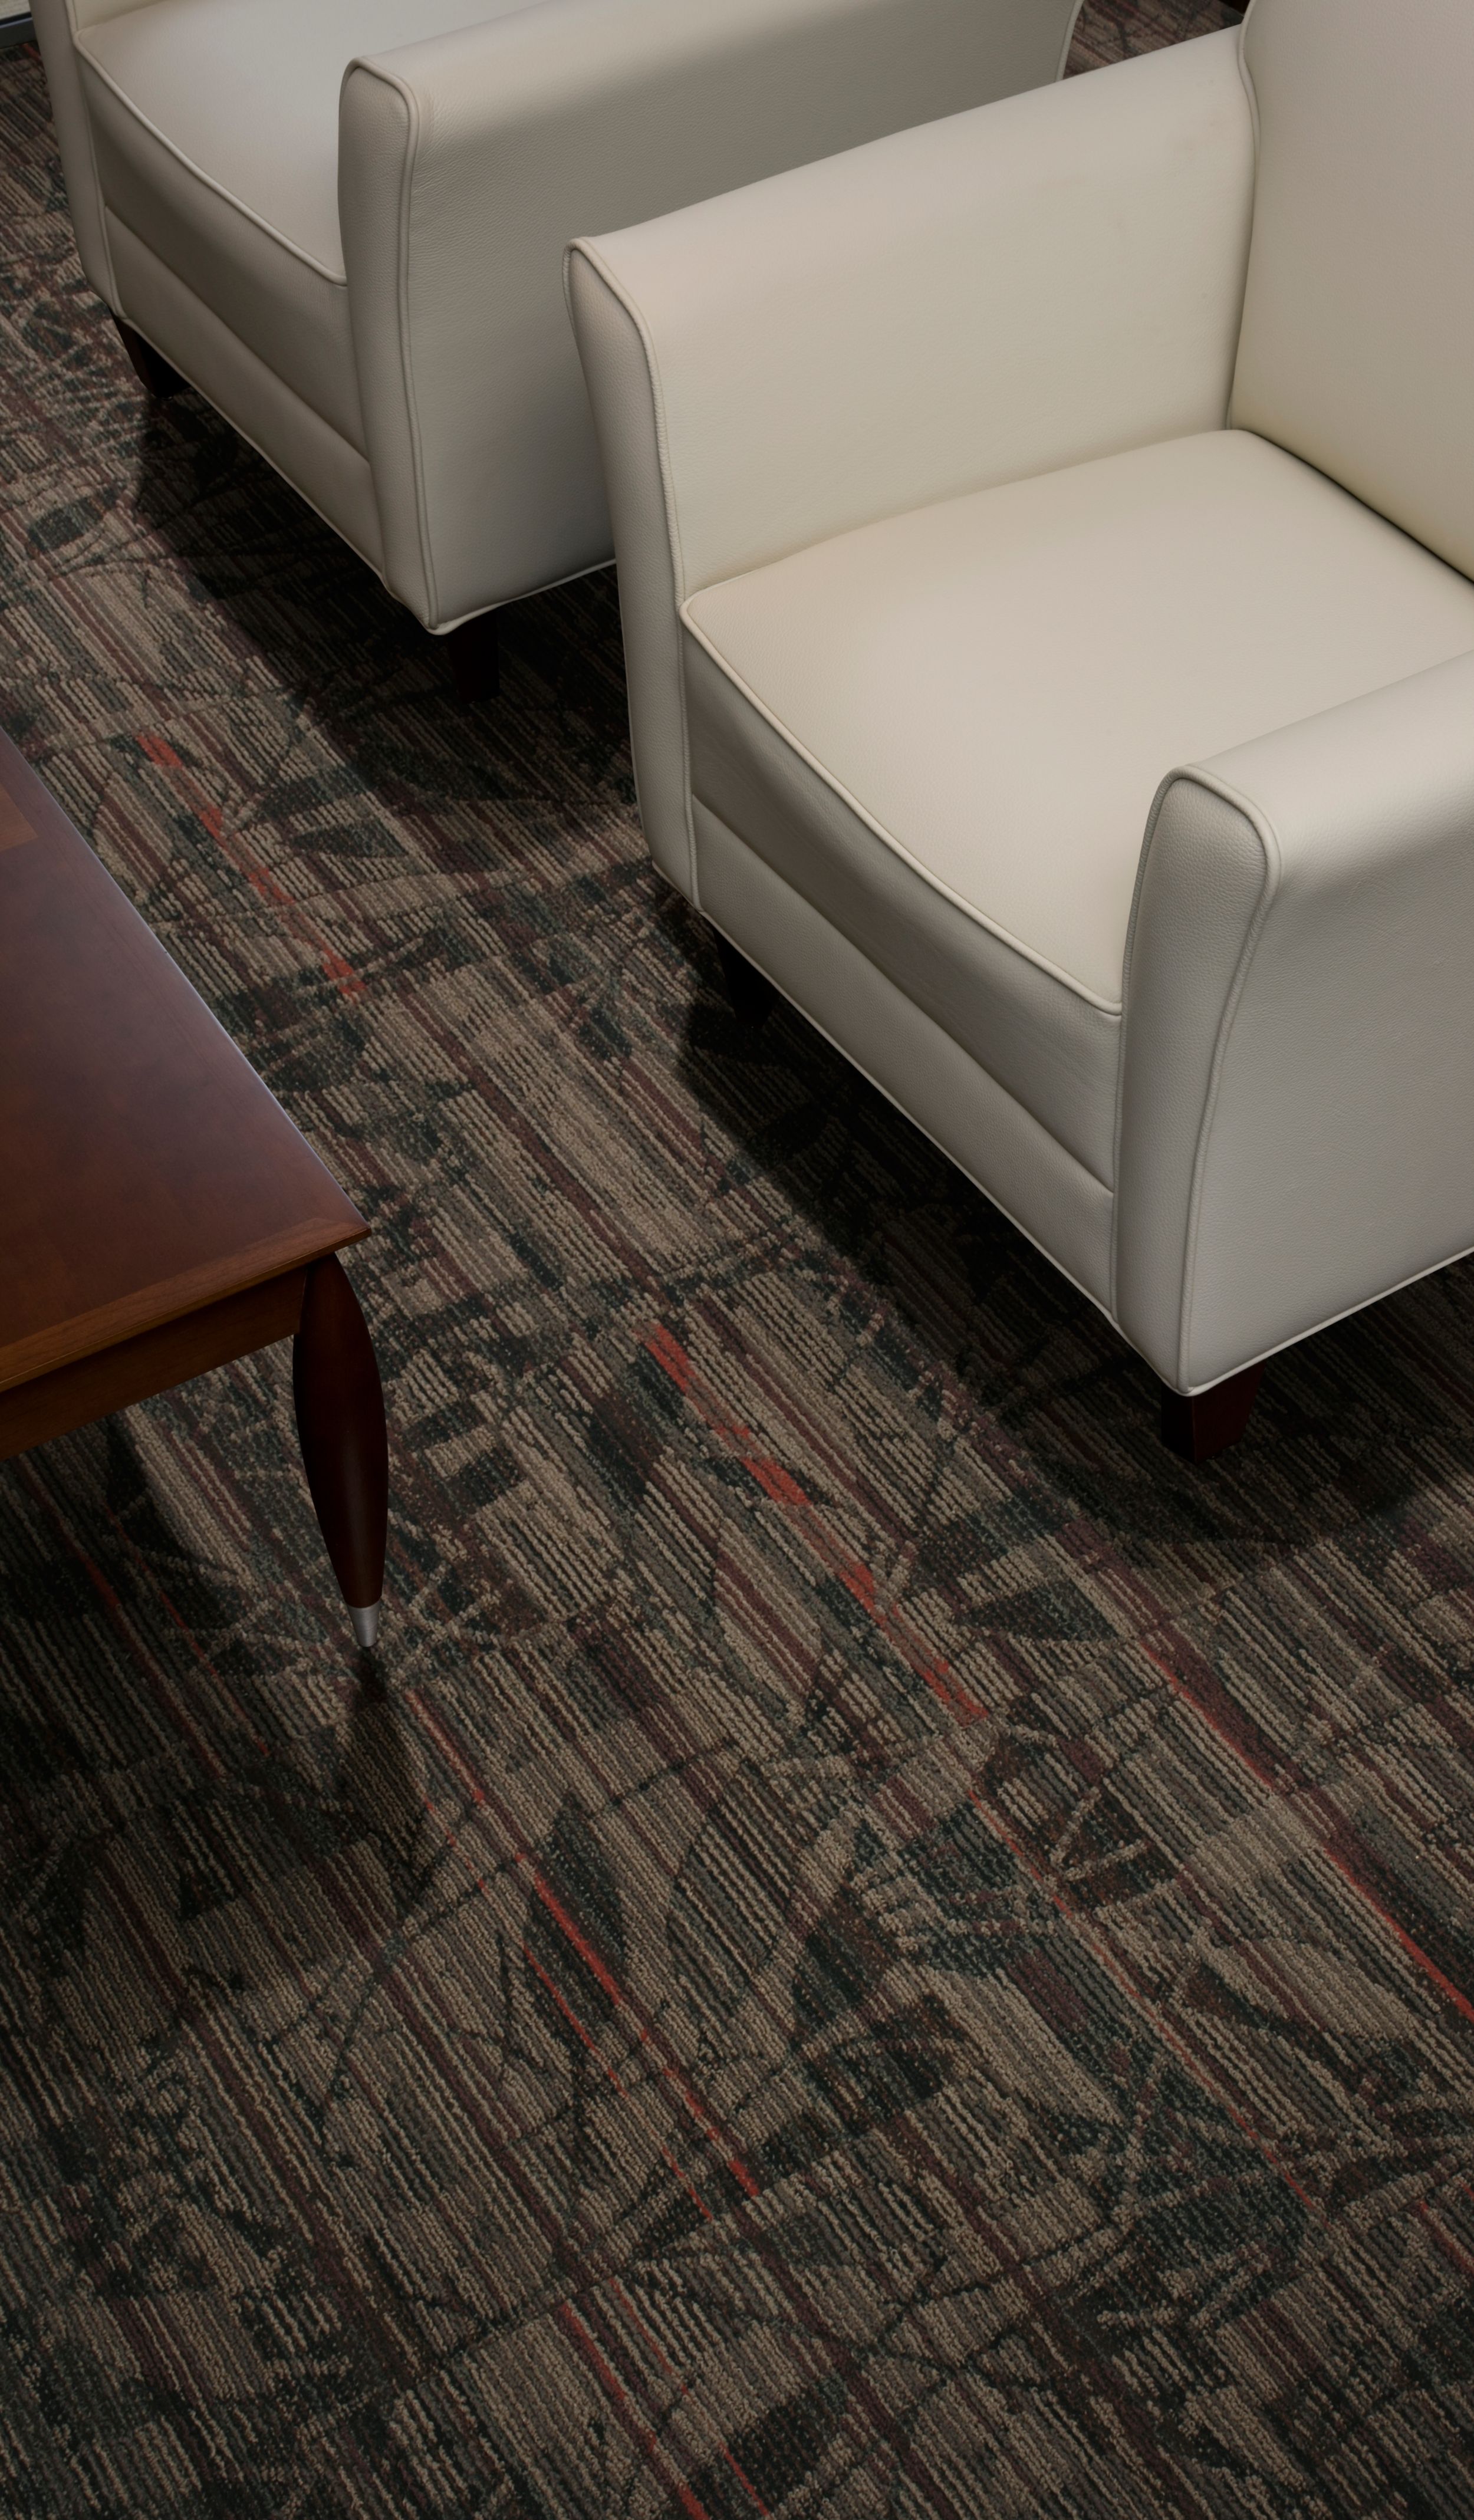 Interface Broadleaf carpet tile in seating area with two cream chairs and wood table numéro d’image 9